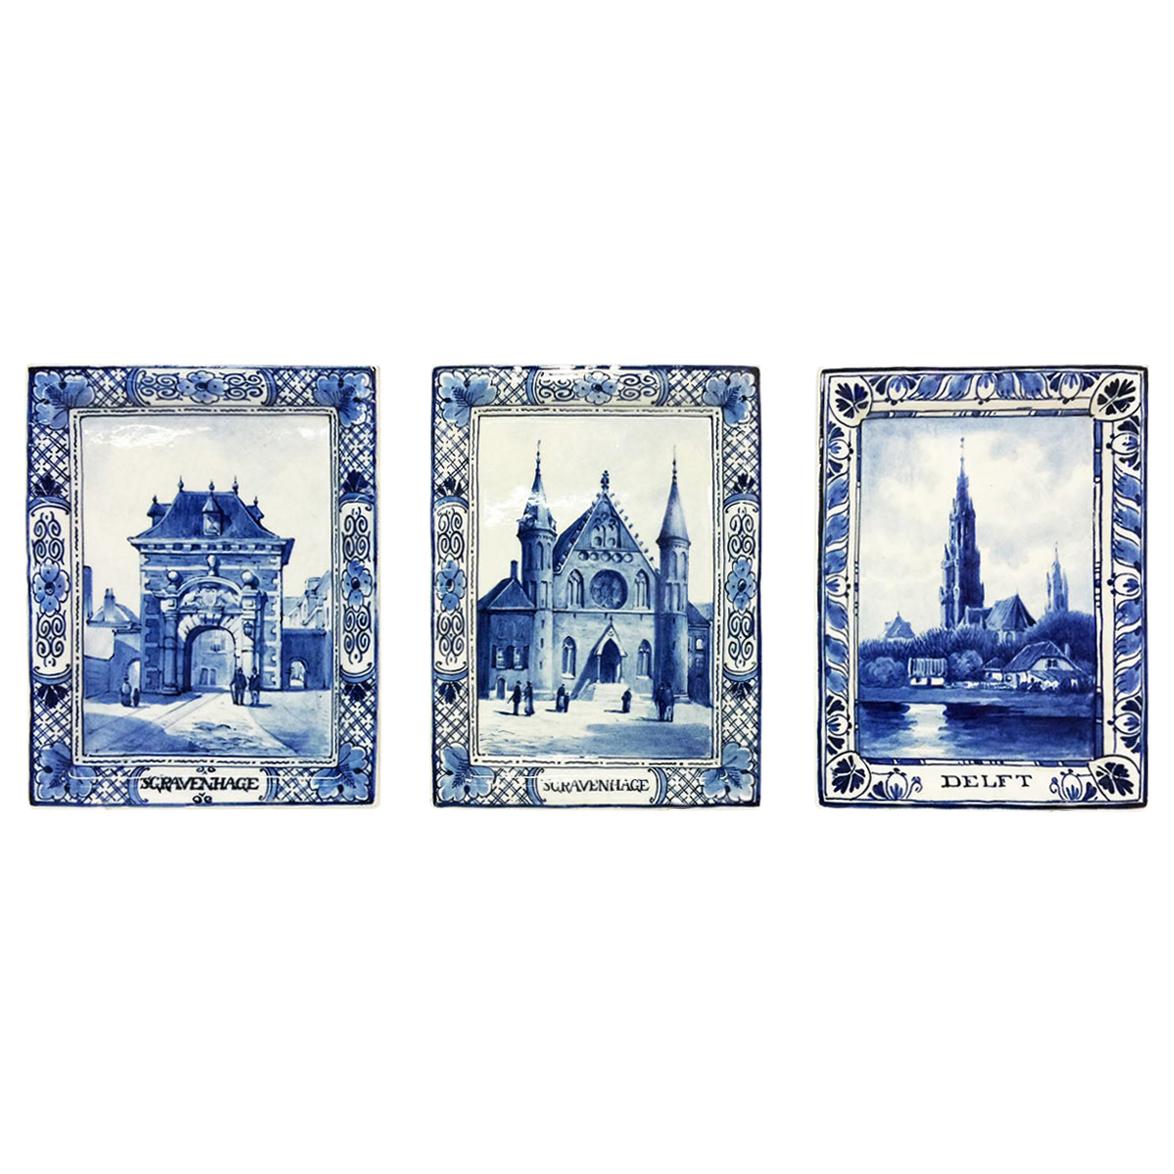 Delft Porceleyne Fles Small Wall Plates, the Hague and Delft, 1894 and 1912 For Sale